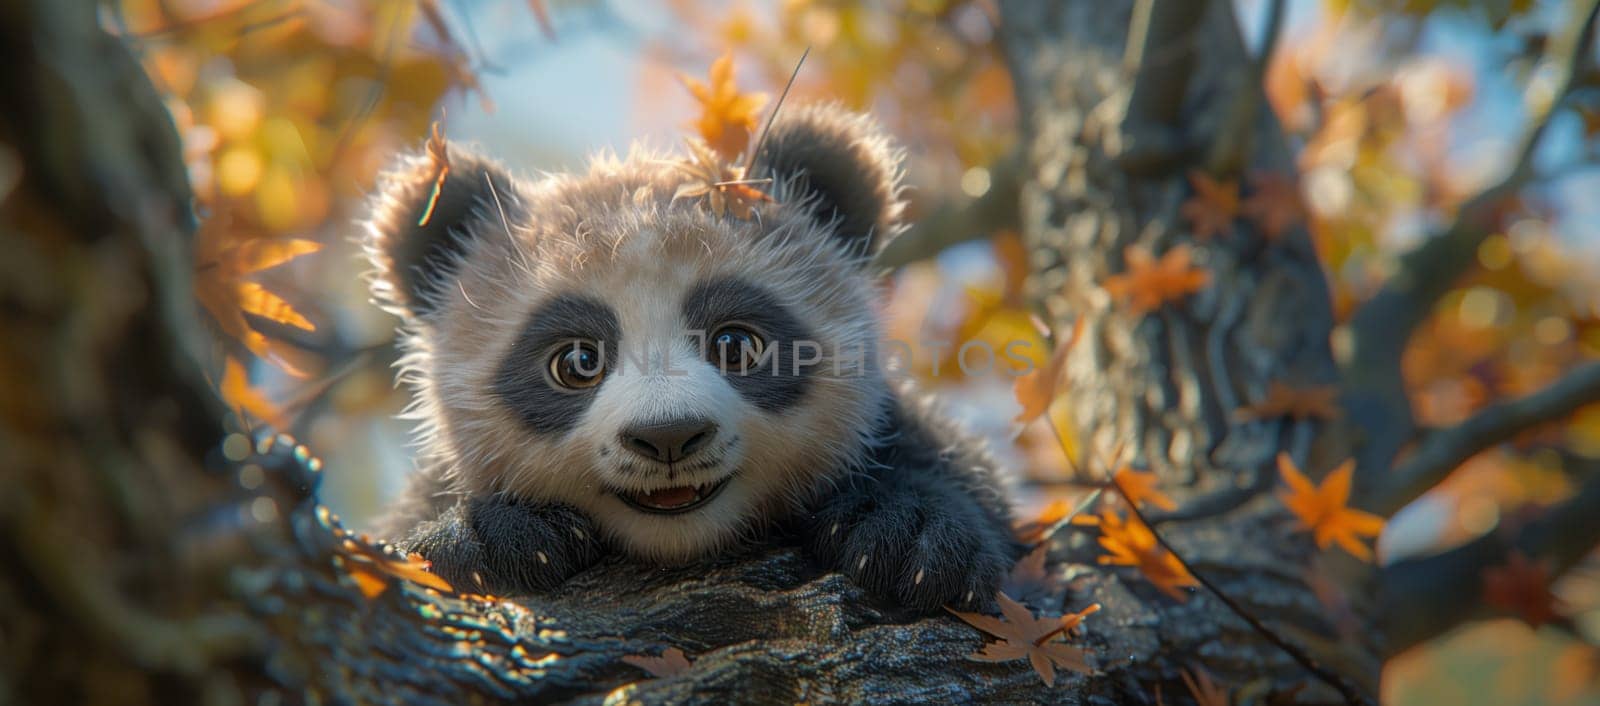 Carnivore with whiskers, a panda bear perches on a tree branch by richwolf